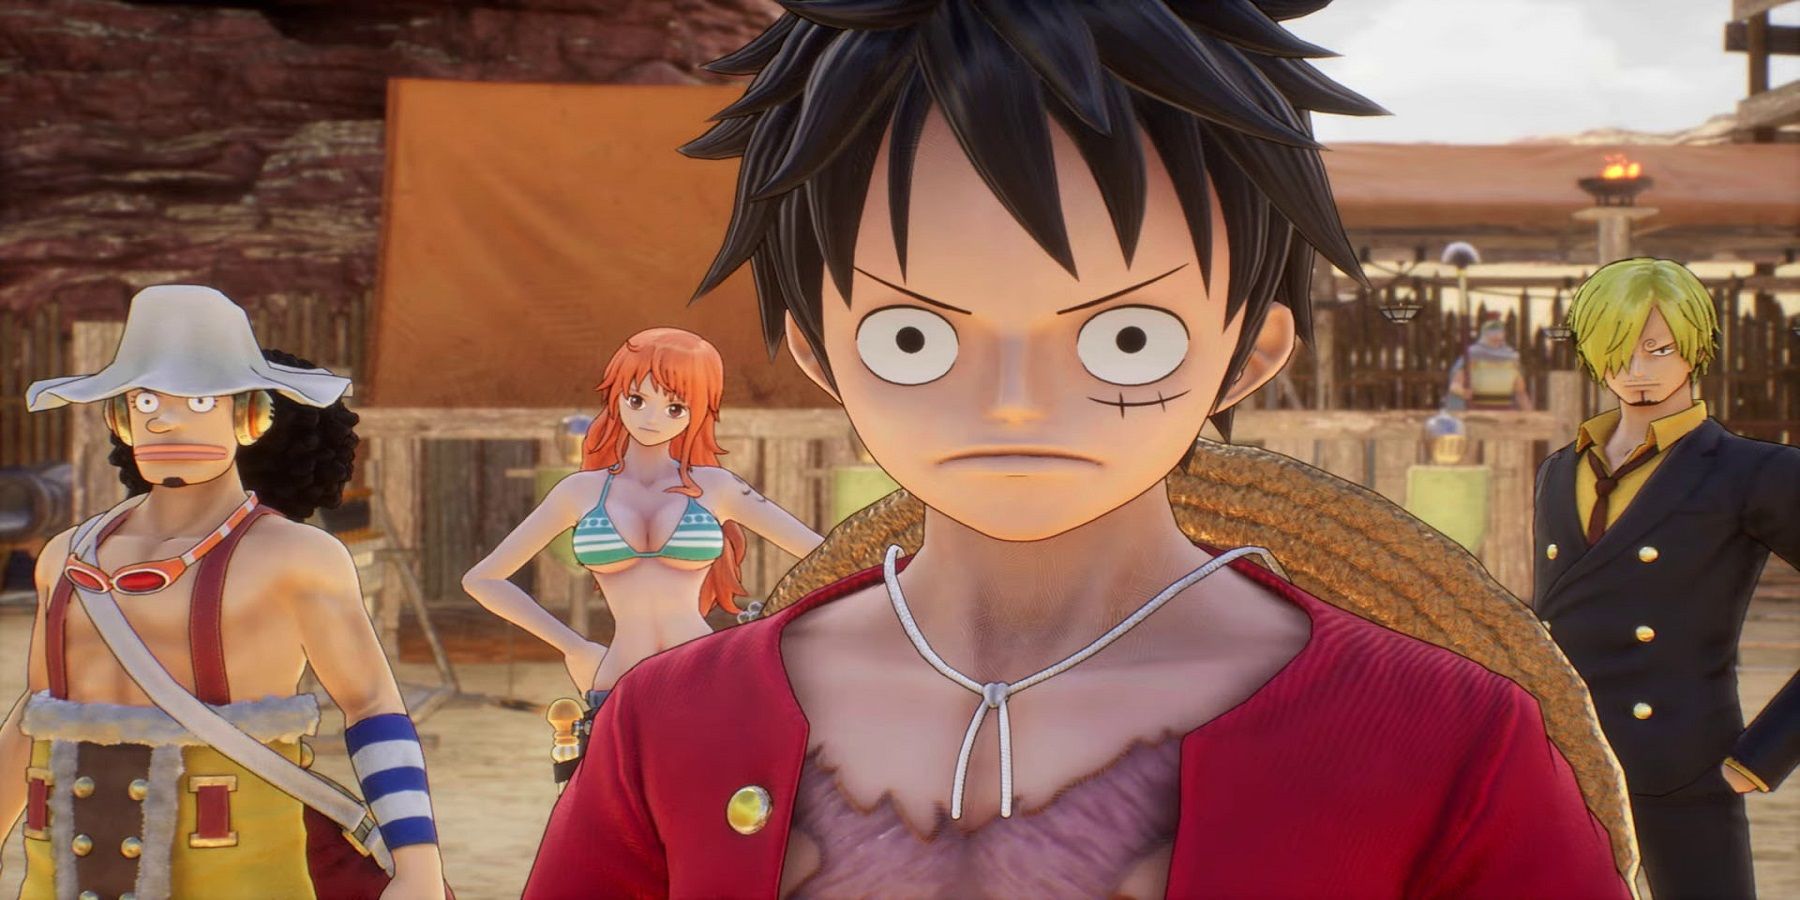 The Straw Hat Pirates will revisit Alabasta and Princess Vivi in One Piece Odyssey.